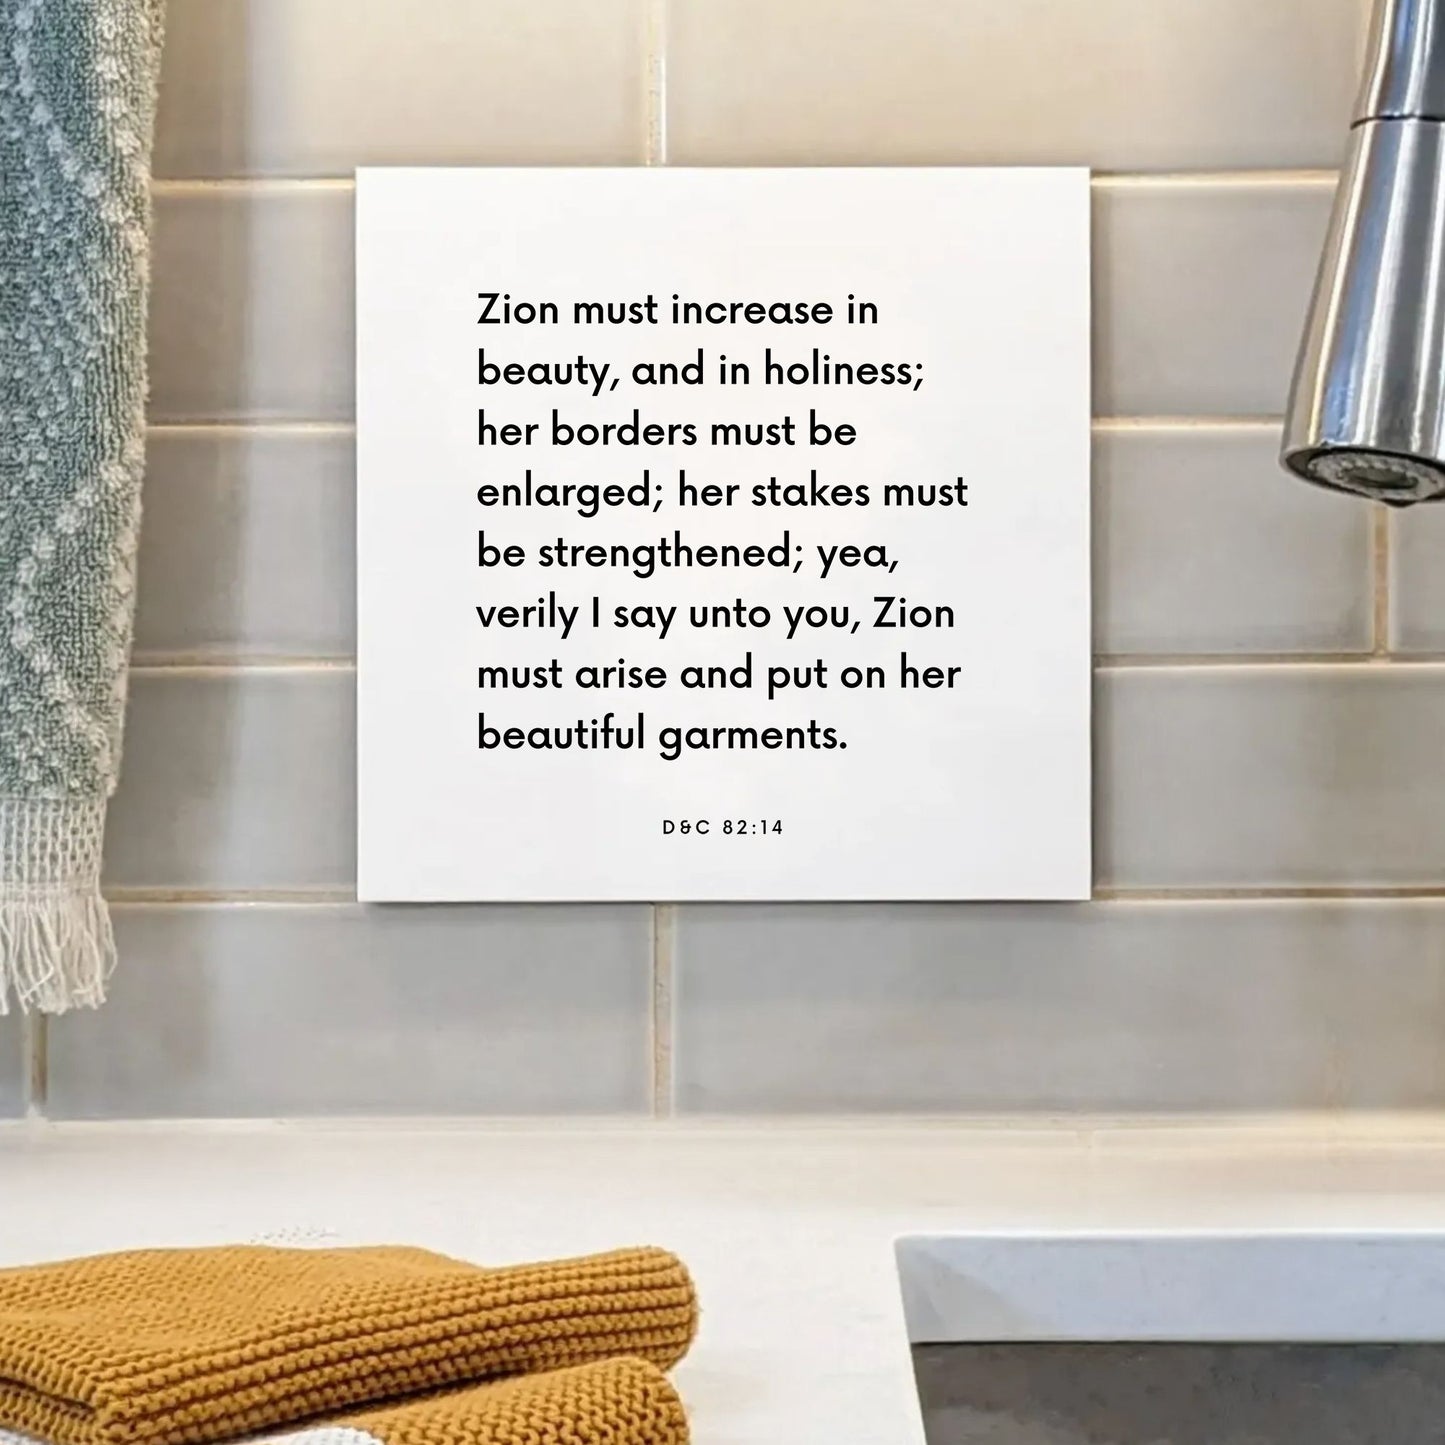 Sink mouting of the scripture tile for D&C 82:14 - "Zion must arise and put on her beautiful garments"